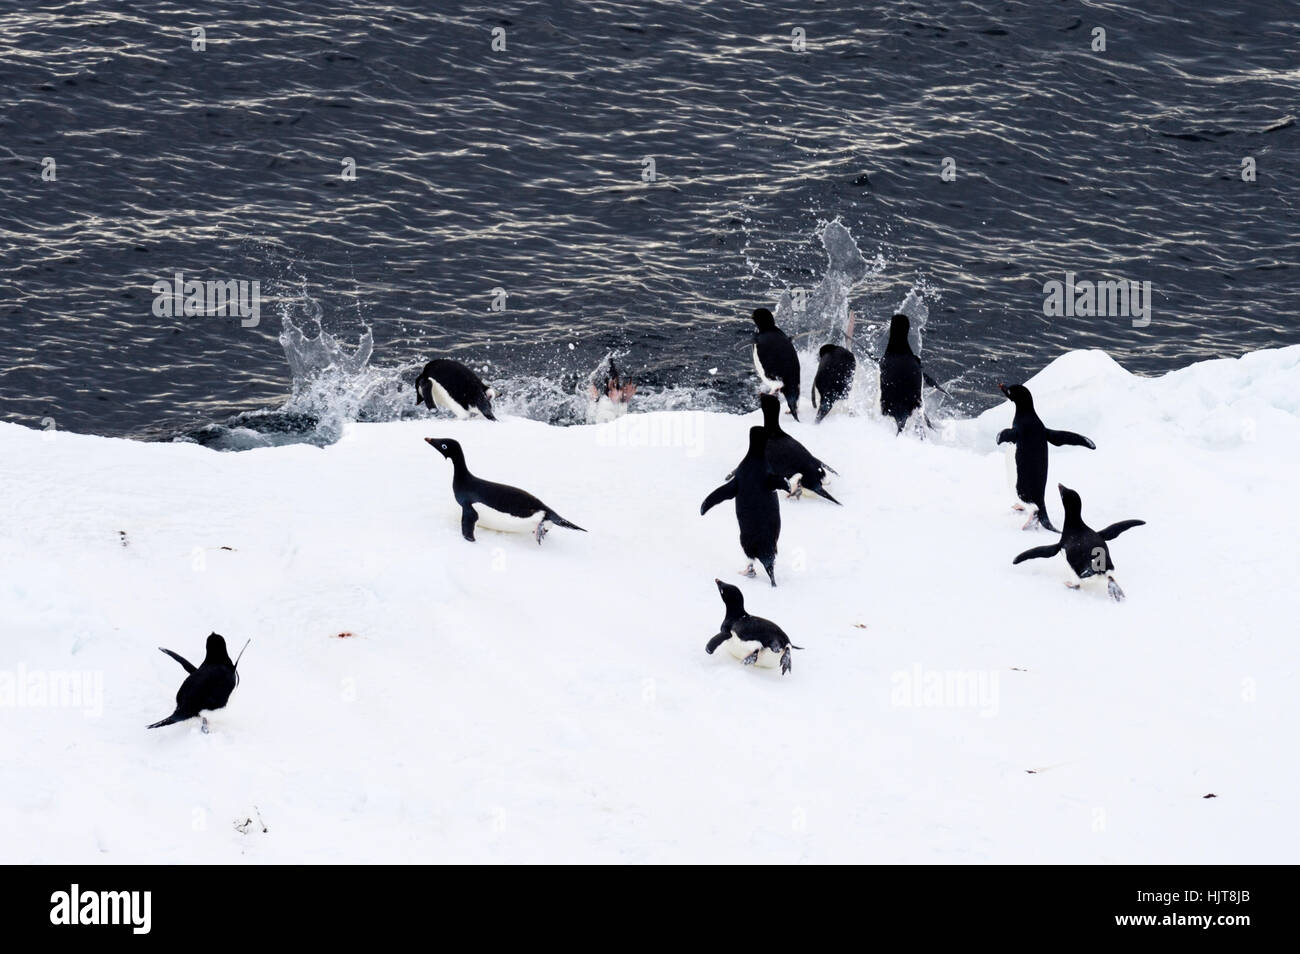 A group of Adelie Penguins launching into the ocean to feed from the sea ice edge. Stock Photo